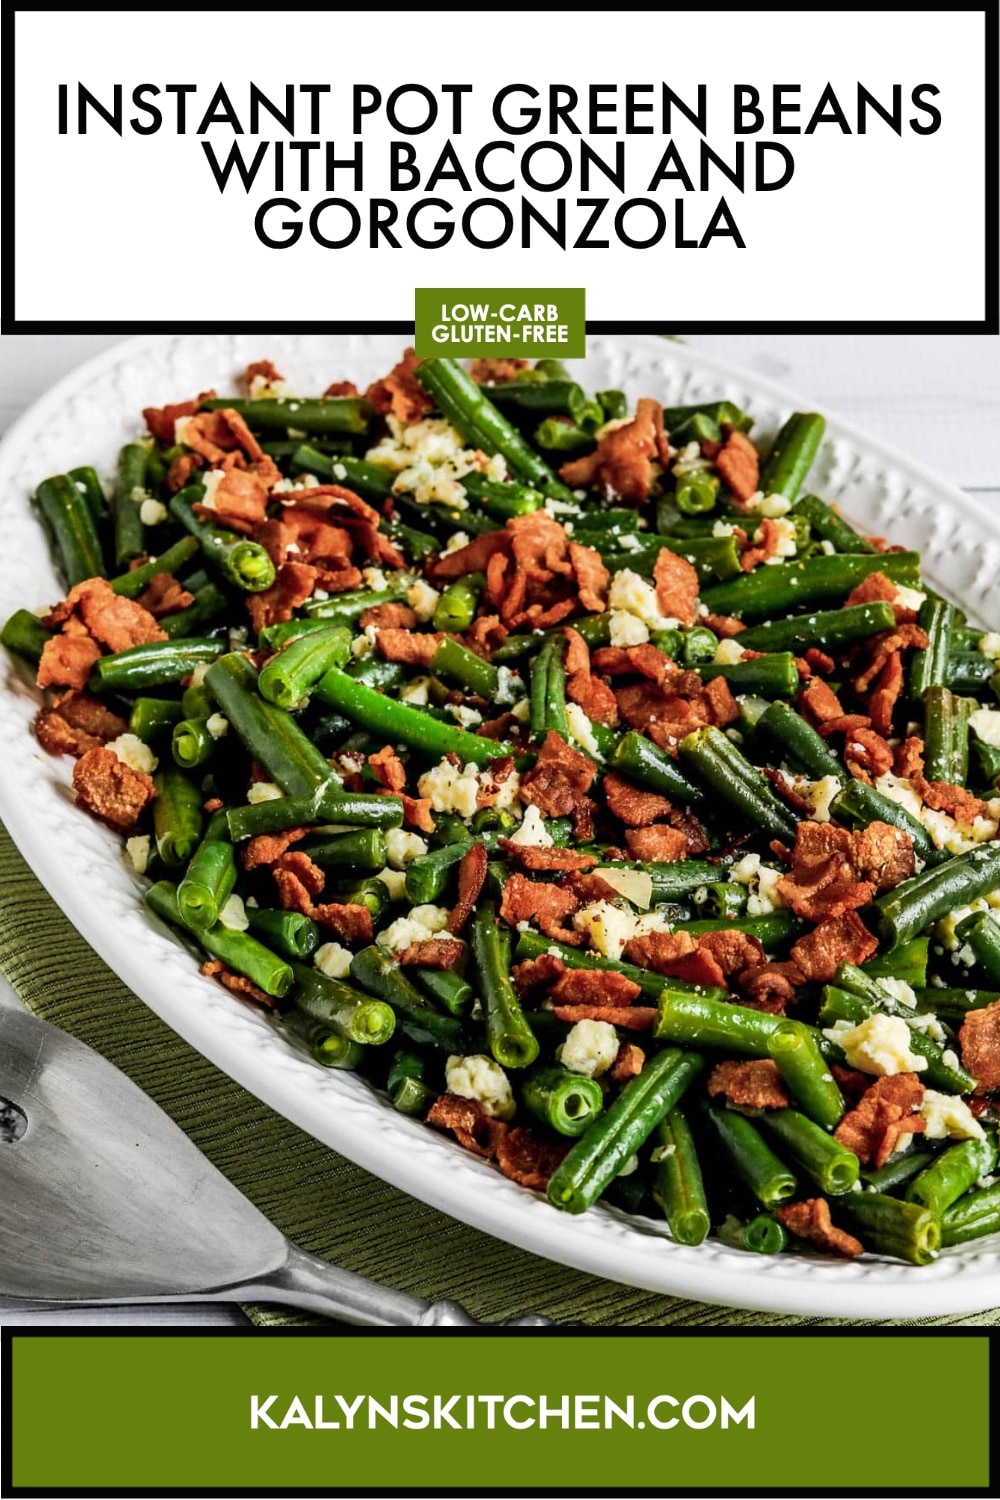 Pinterest image of Instant Pot Green Beans with Bacon and Gorgonzola